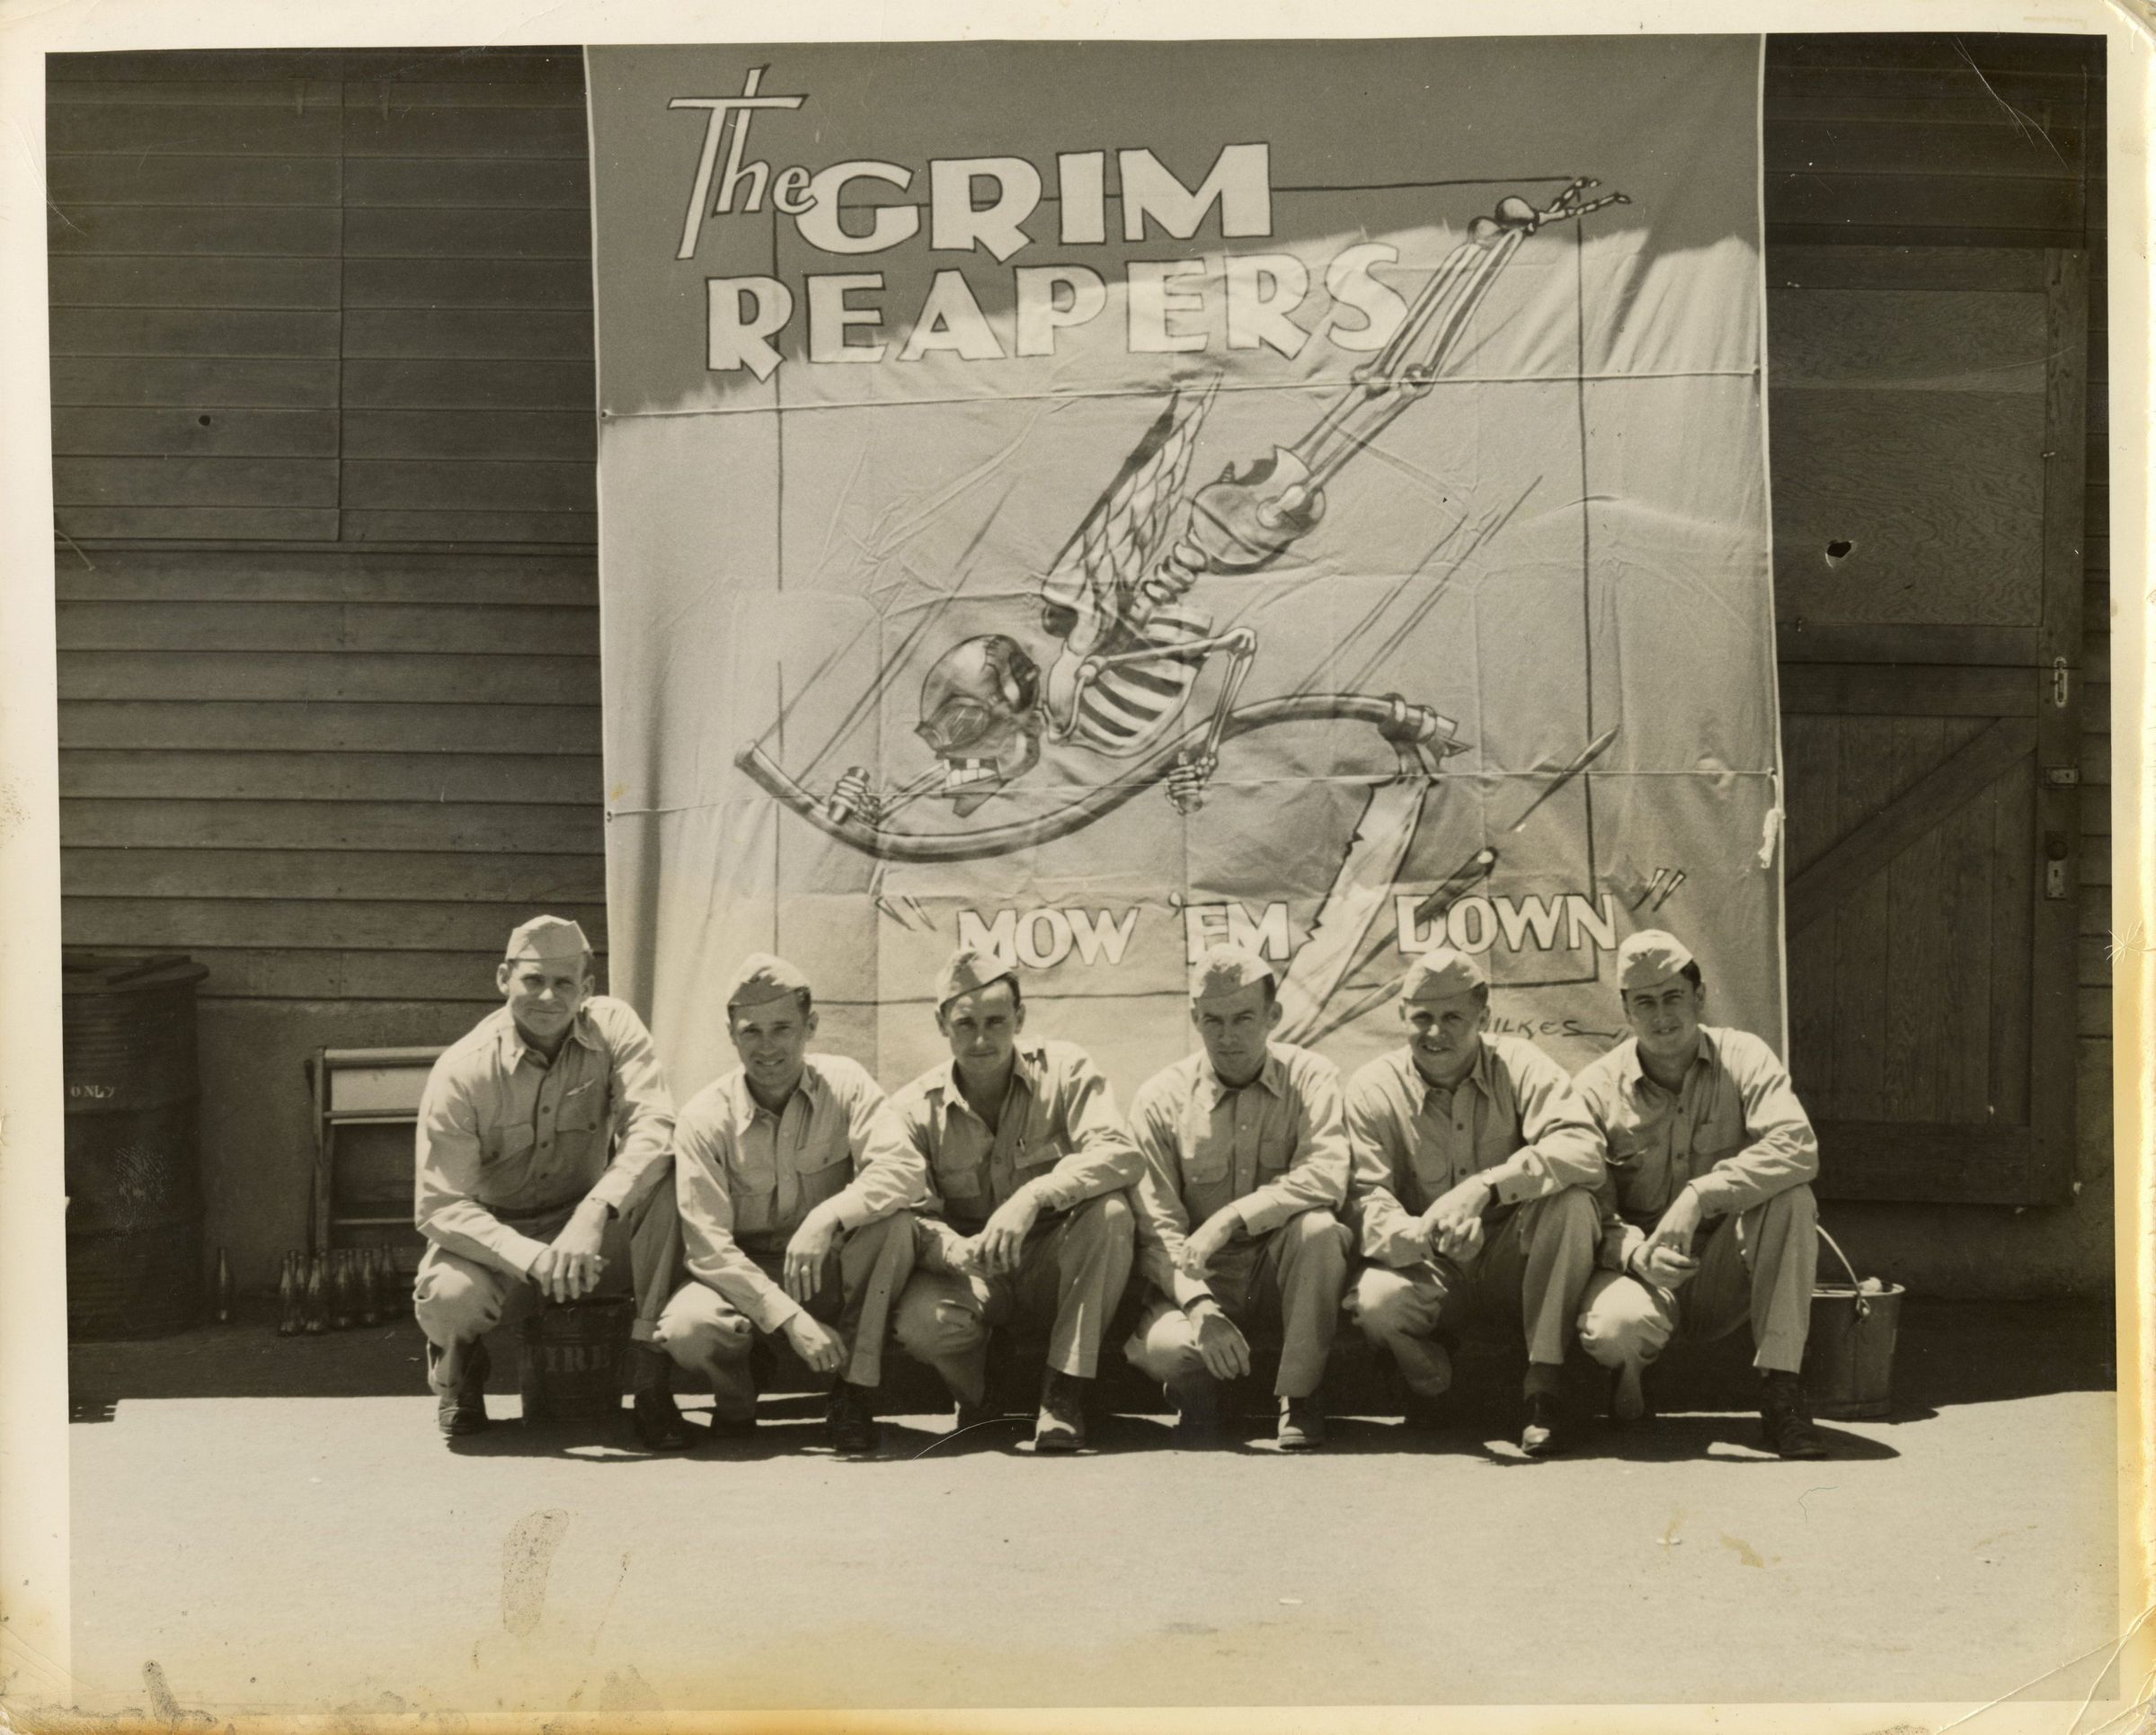 Primary Image of Several Members of Fighting Squadron Ten (VF-10) Sitting in Front of a Grim Reapers Banner